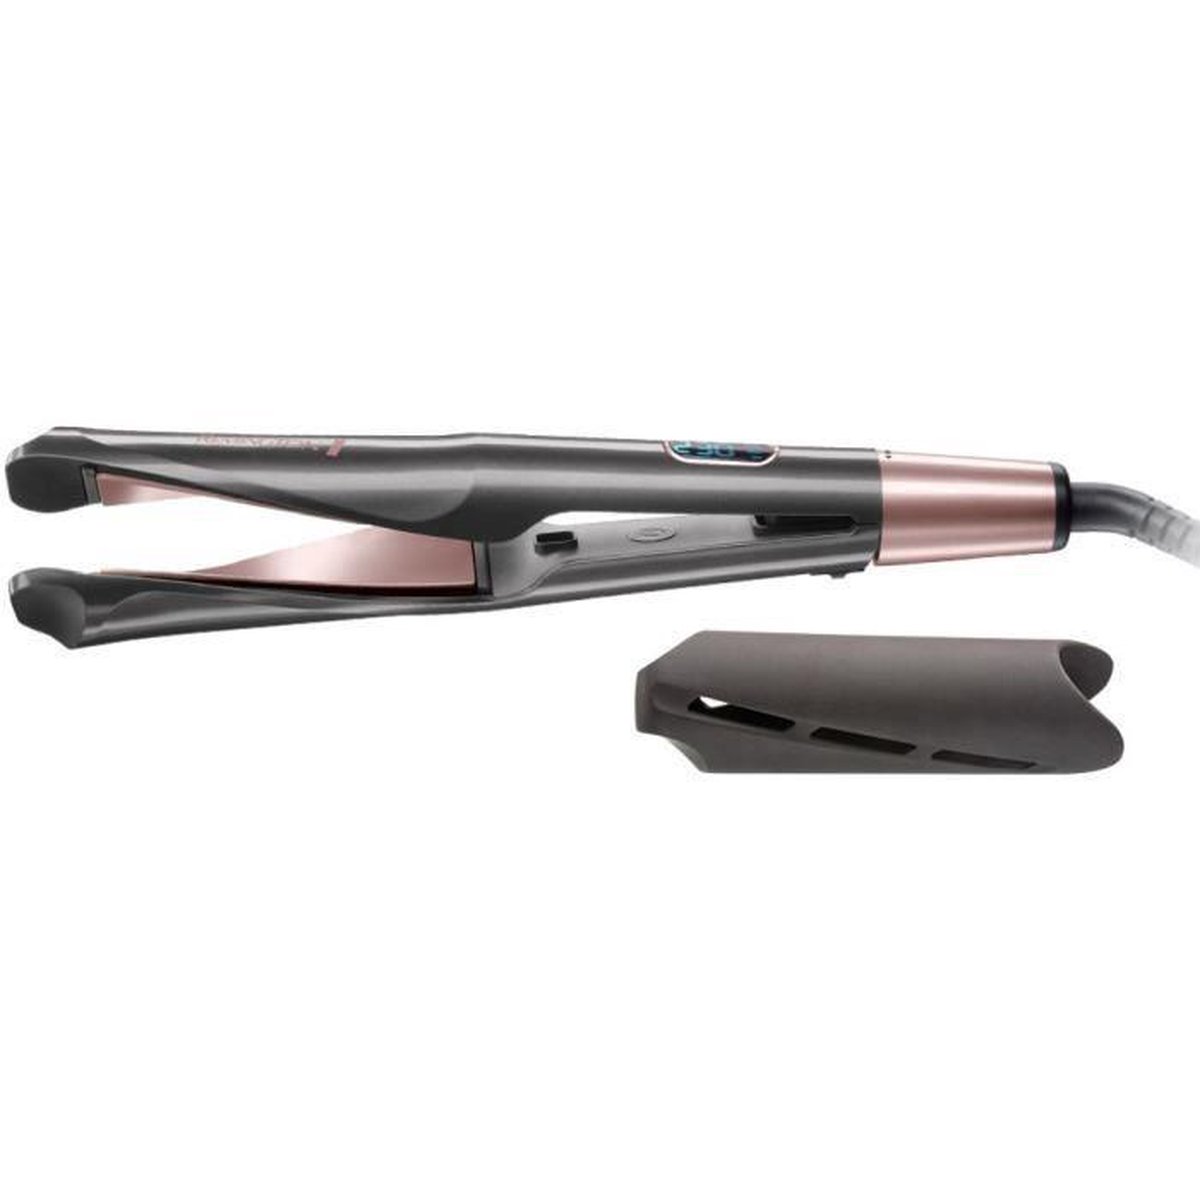 & S6606 Confidence Curl - Stijltang Remington Straight | bol 2-in-1